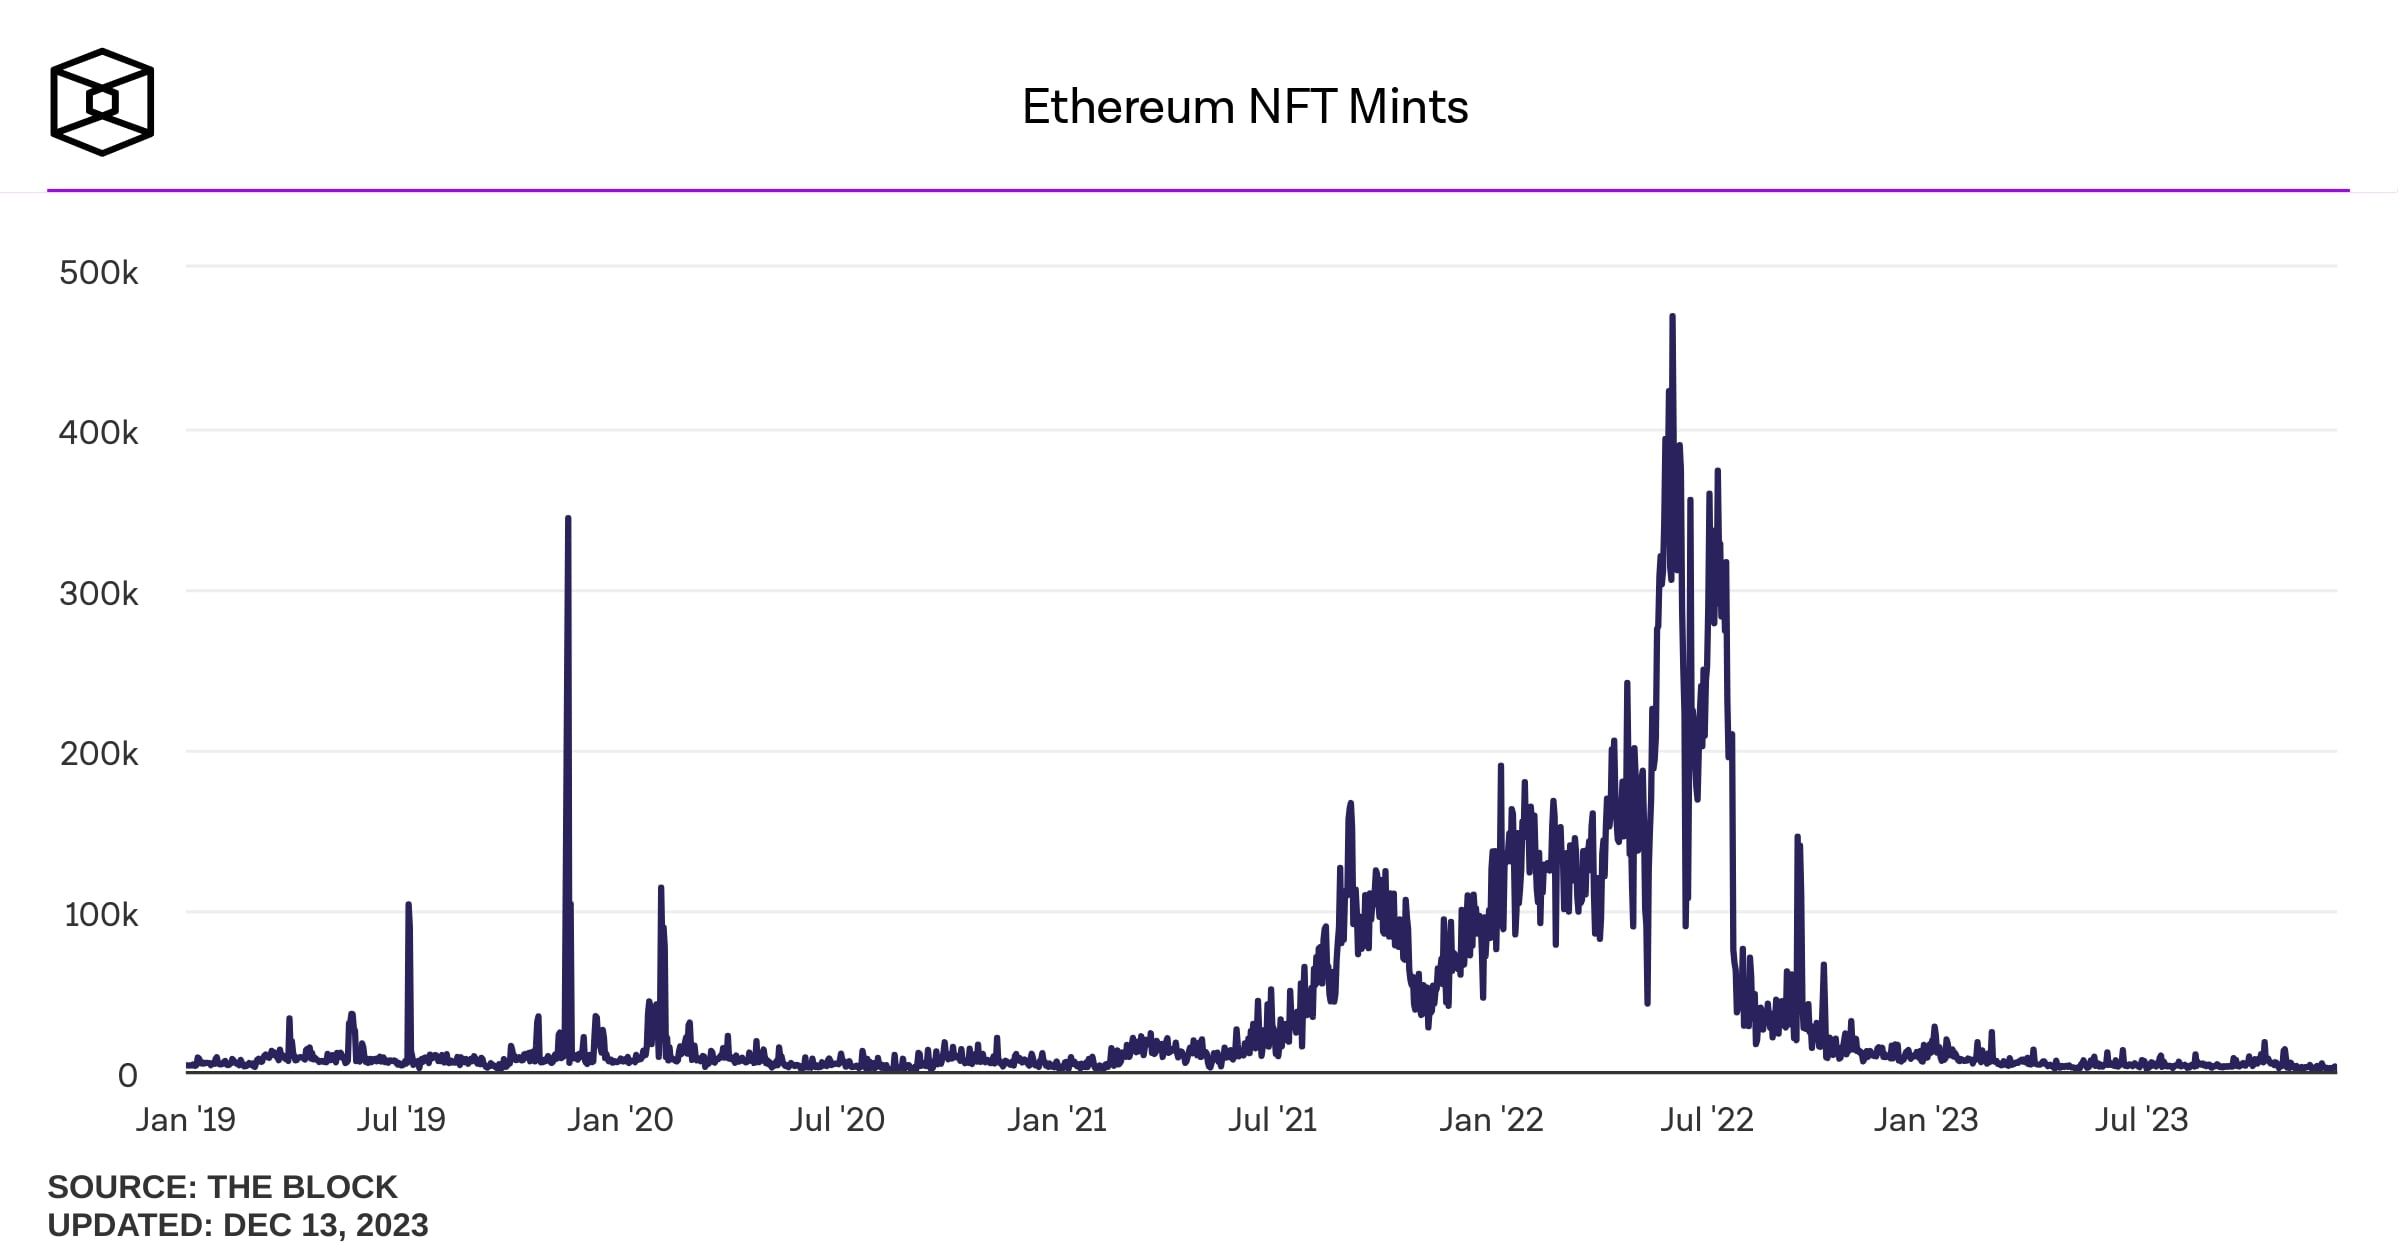 Graph of Ethereum NFT minting volume over time.